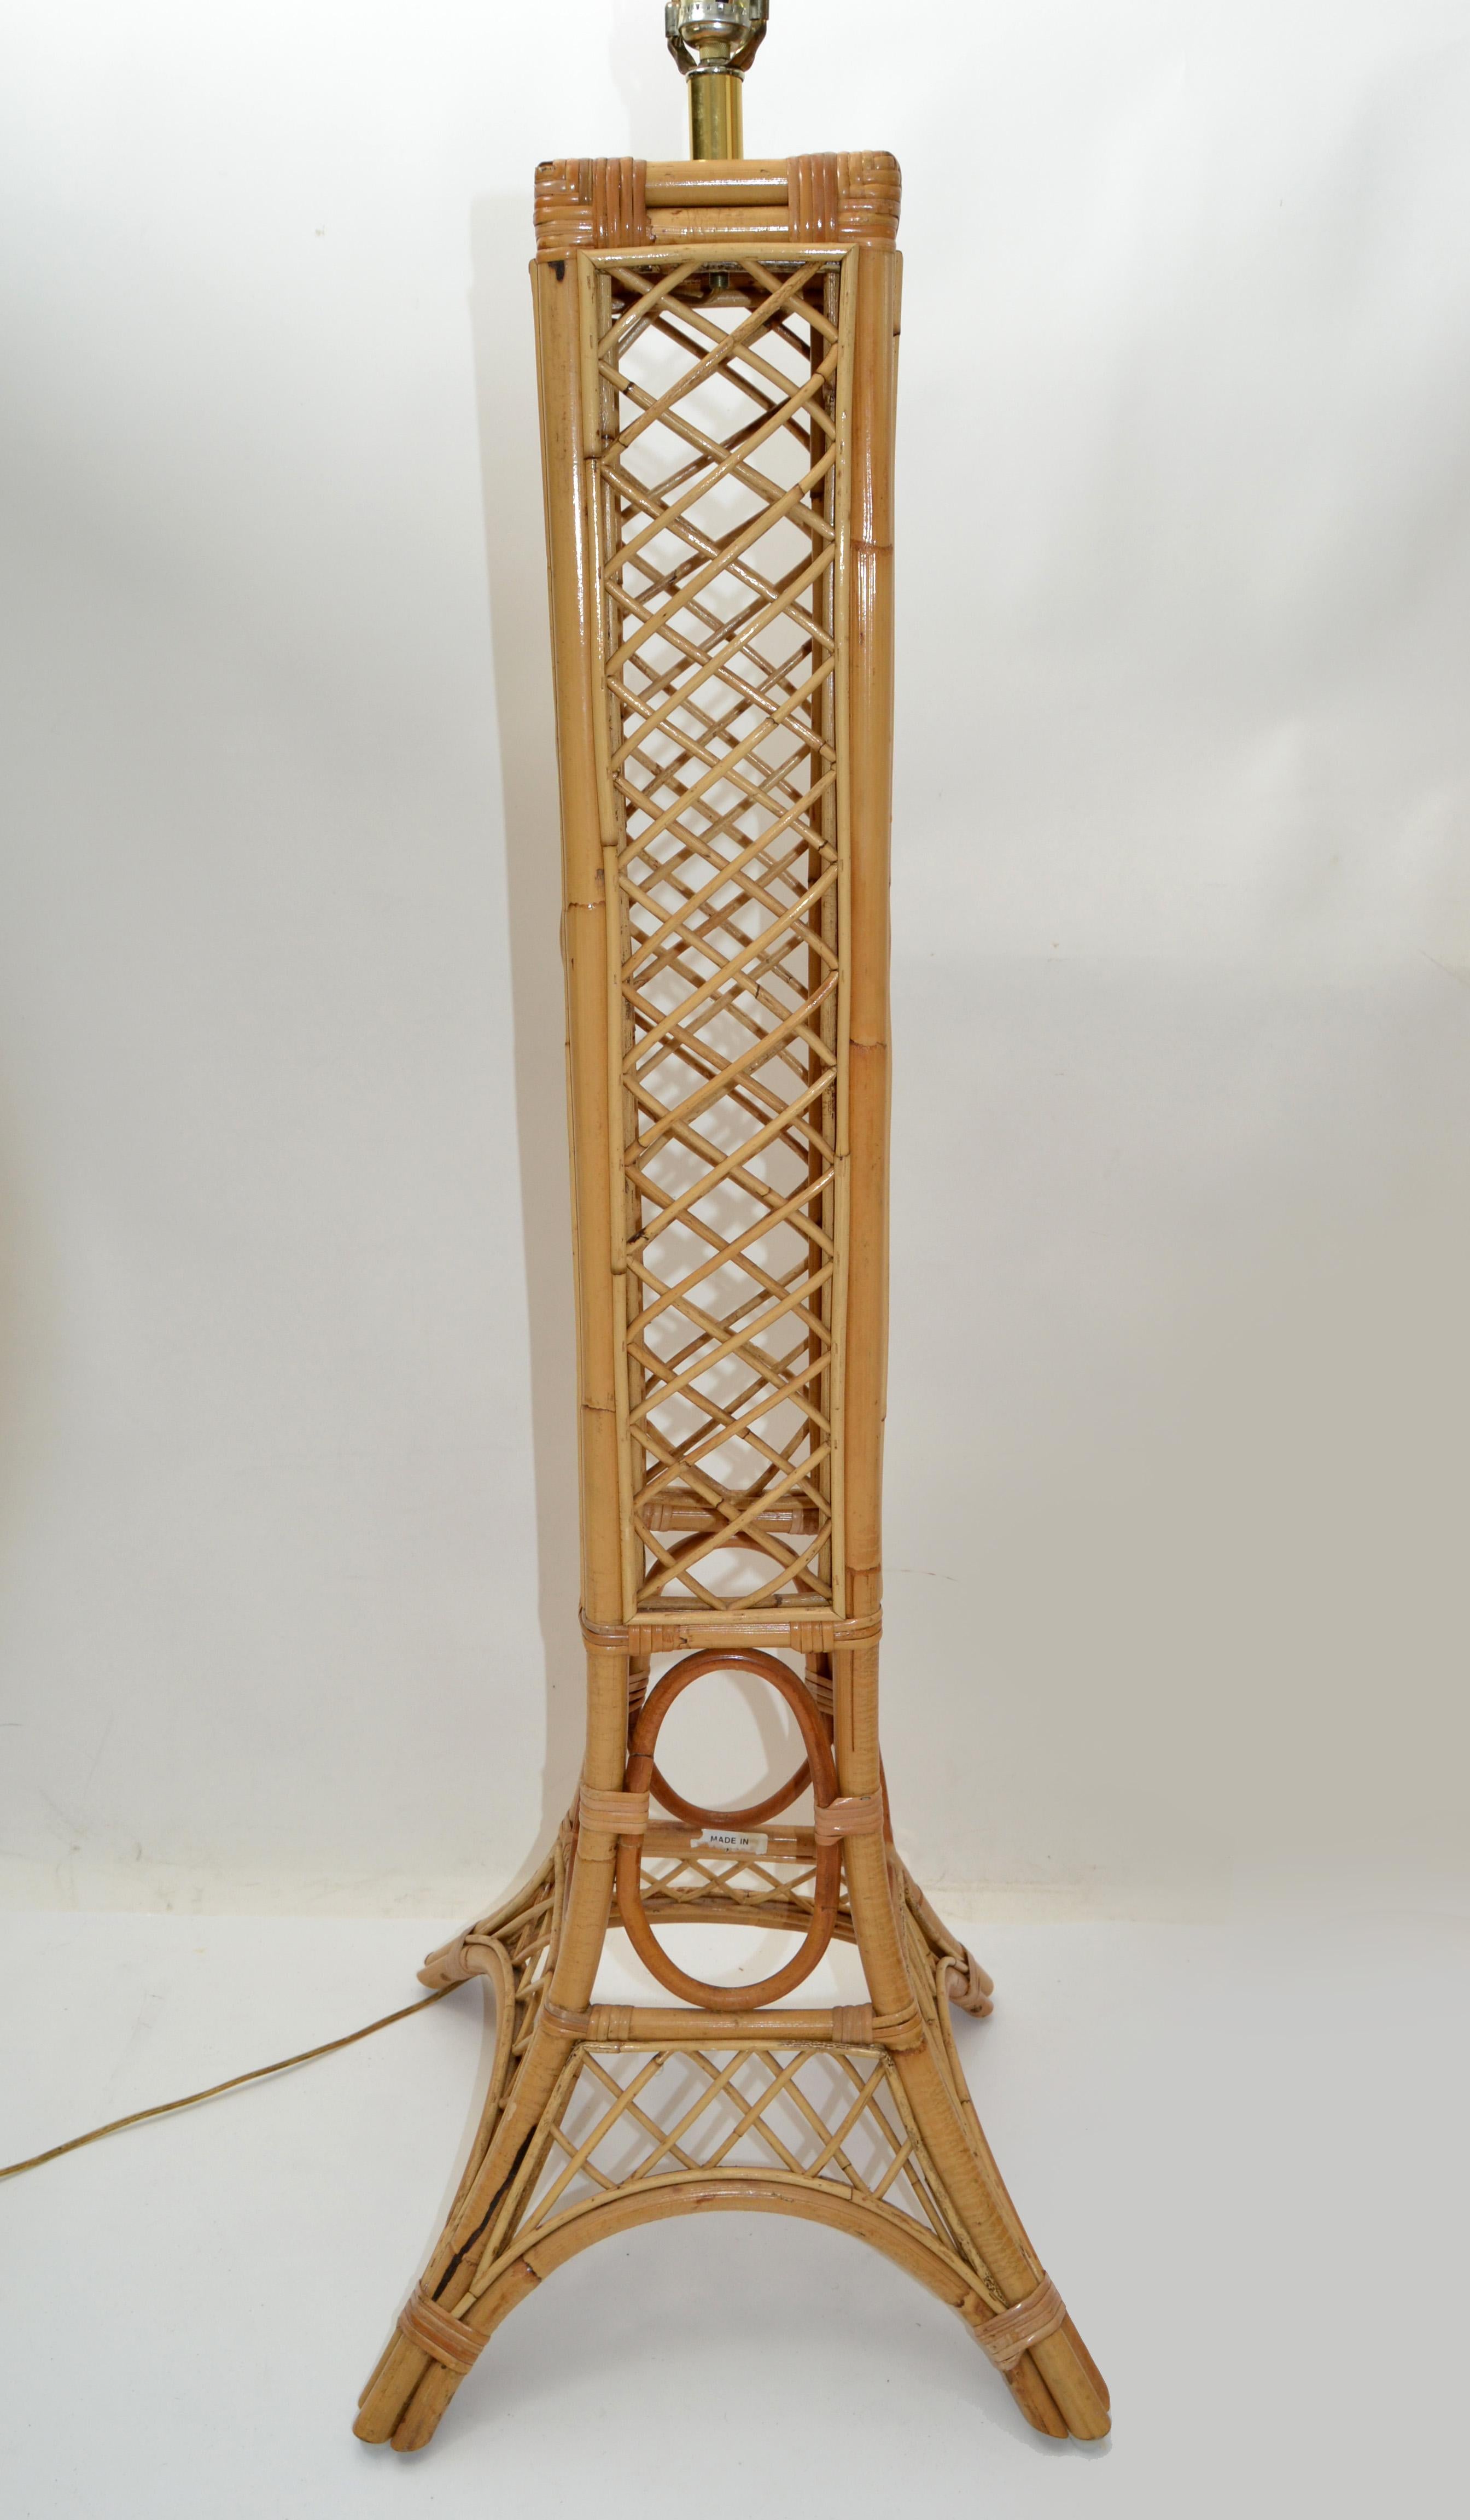 Hand-Crafted Eiffel Tower Paris Pencil Reed & Bend Bamboo Mid-Century Modern Floor Lamp 1970 For Sale